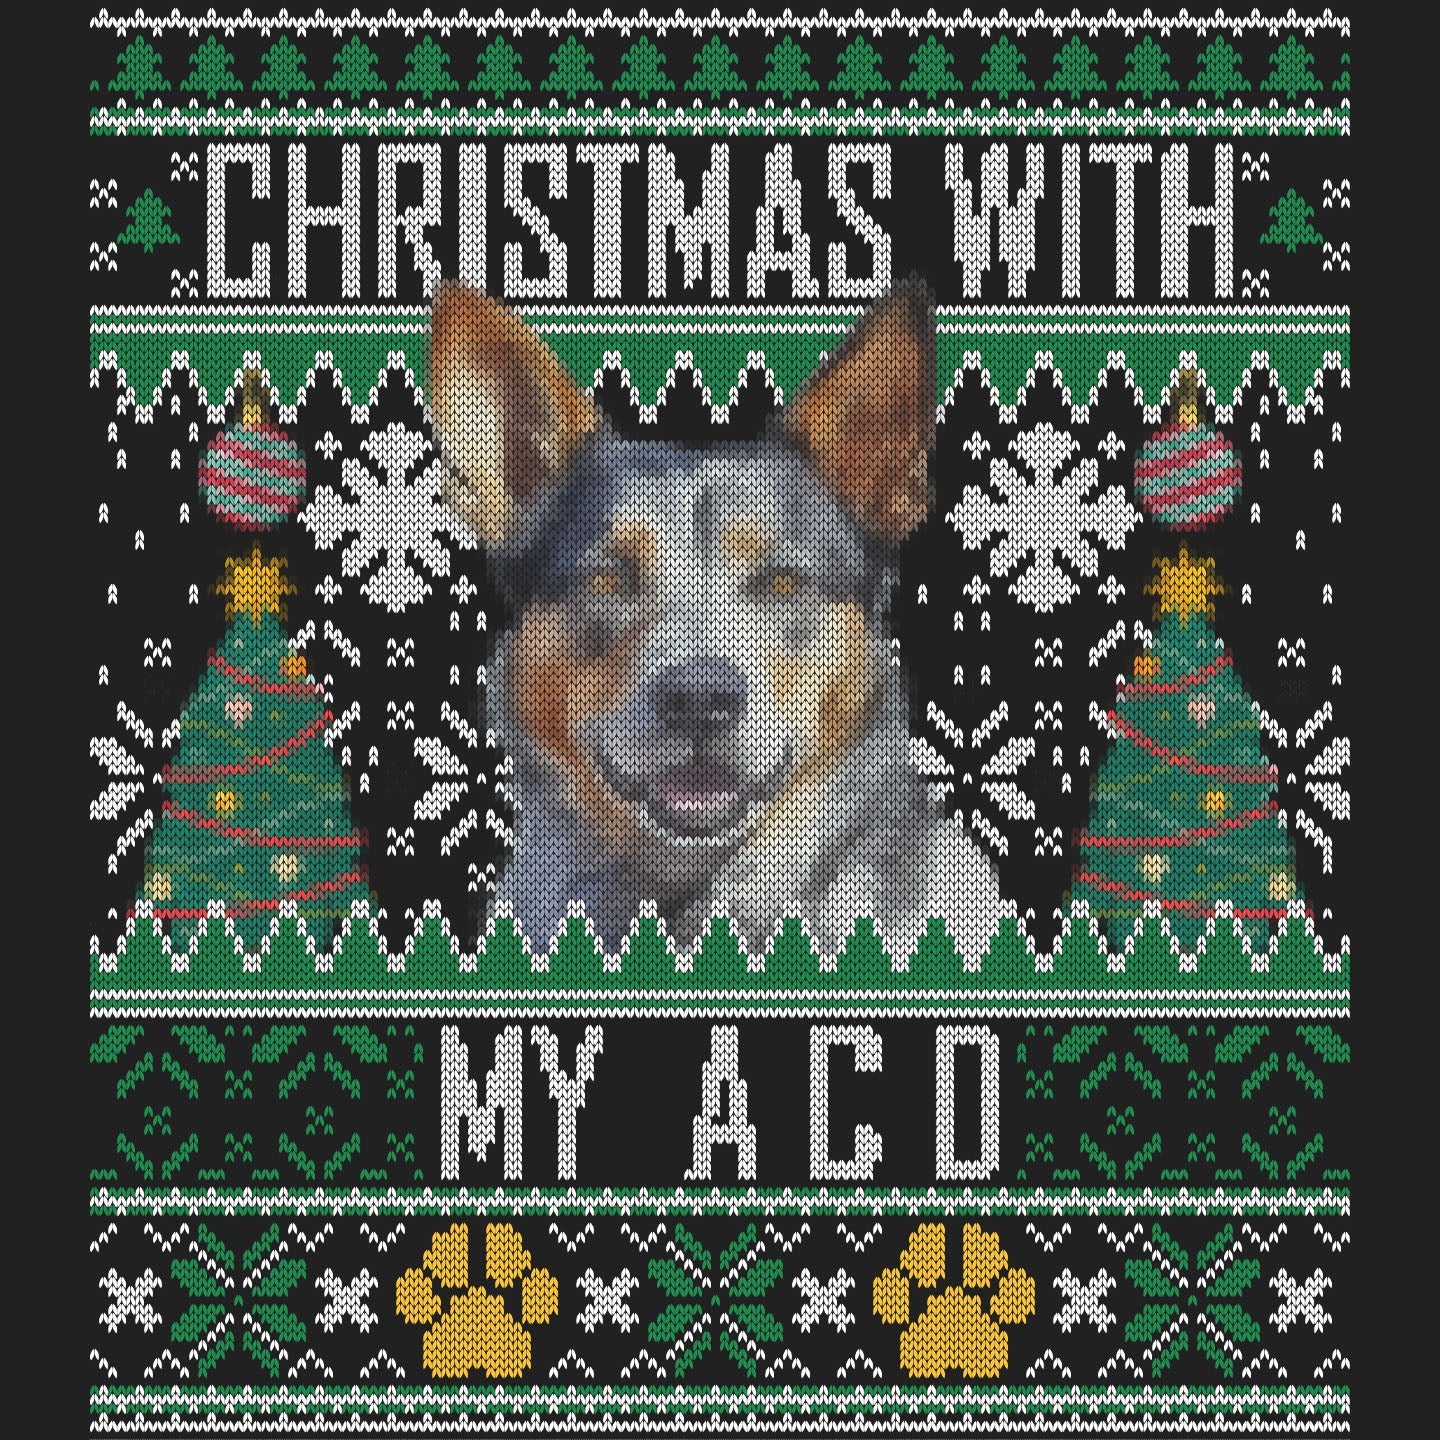 Ugly Sweater Christmas with My Australian Cattle Dog - Women's V-Neck Long Sleeve T-Shirt